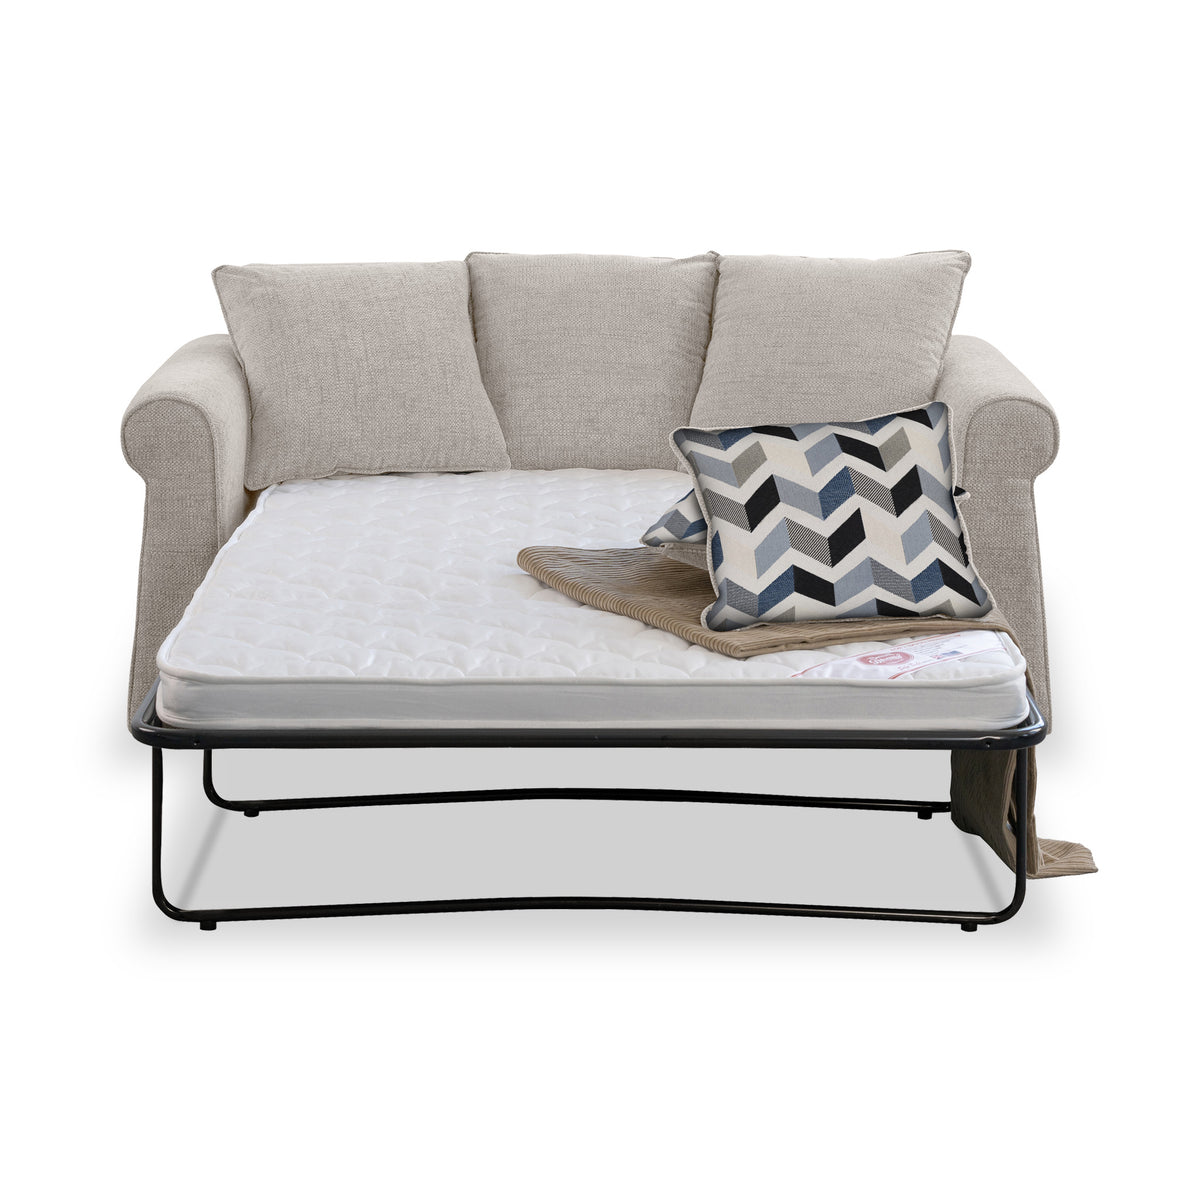 Branston Oatmeal Soft Weave 2 Seater Sofabed with Denim Scatter Cushions from Roseland Furniture